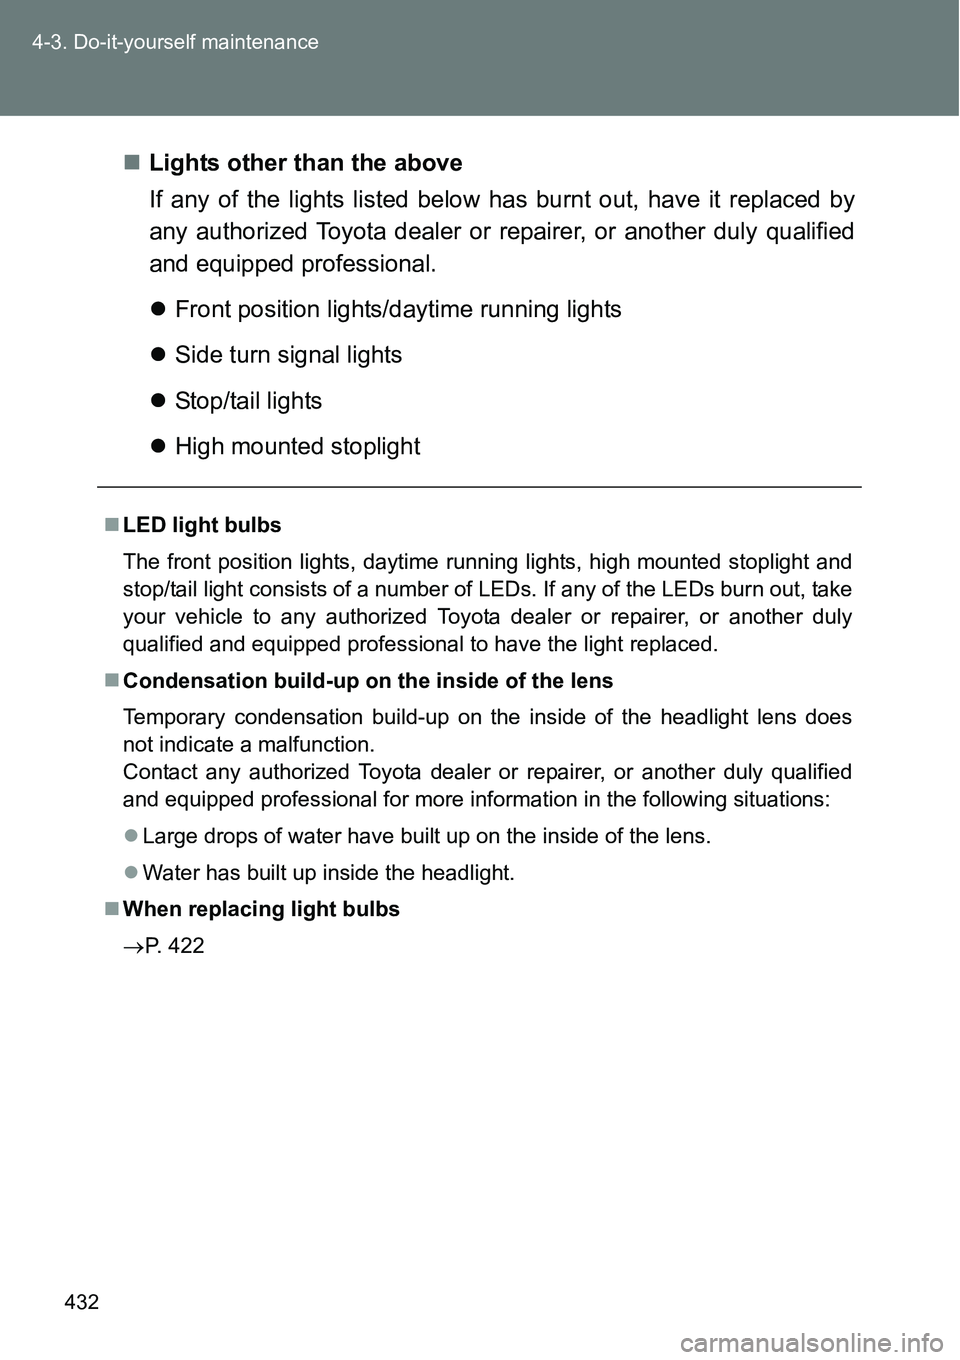 TOYOTA VERSO S 2015  Owners Manual 432 4-3. Do-it-yourself maintenance
Lights other than the above
If any of the lights listed below has burnt out, have it replaced by
any authorized Toyota dealer or repairer, or another duly qualif